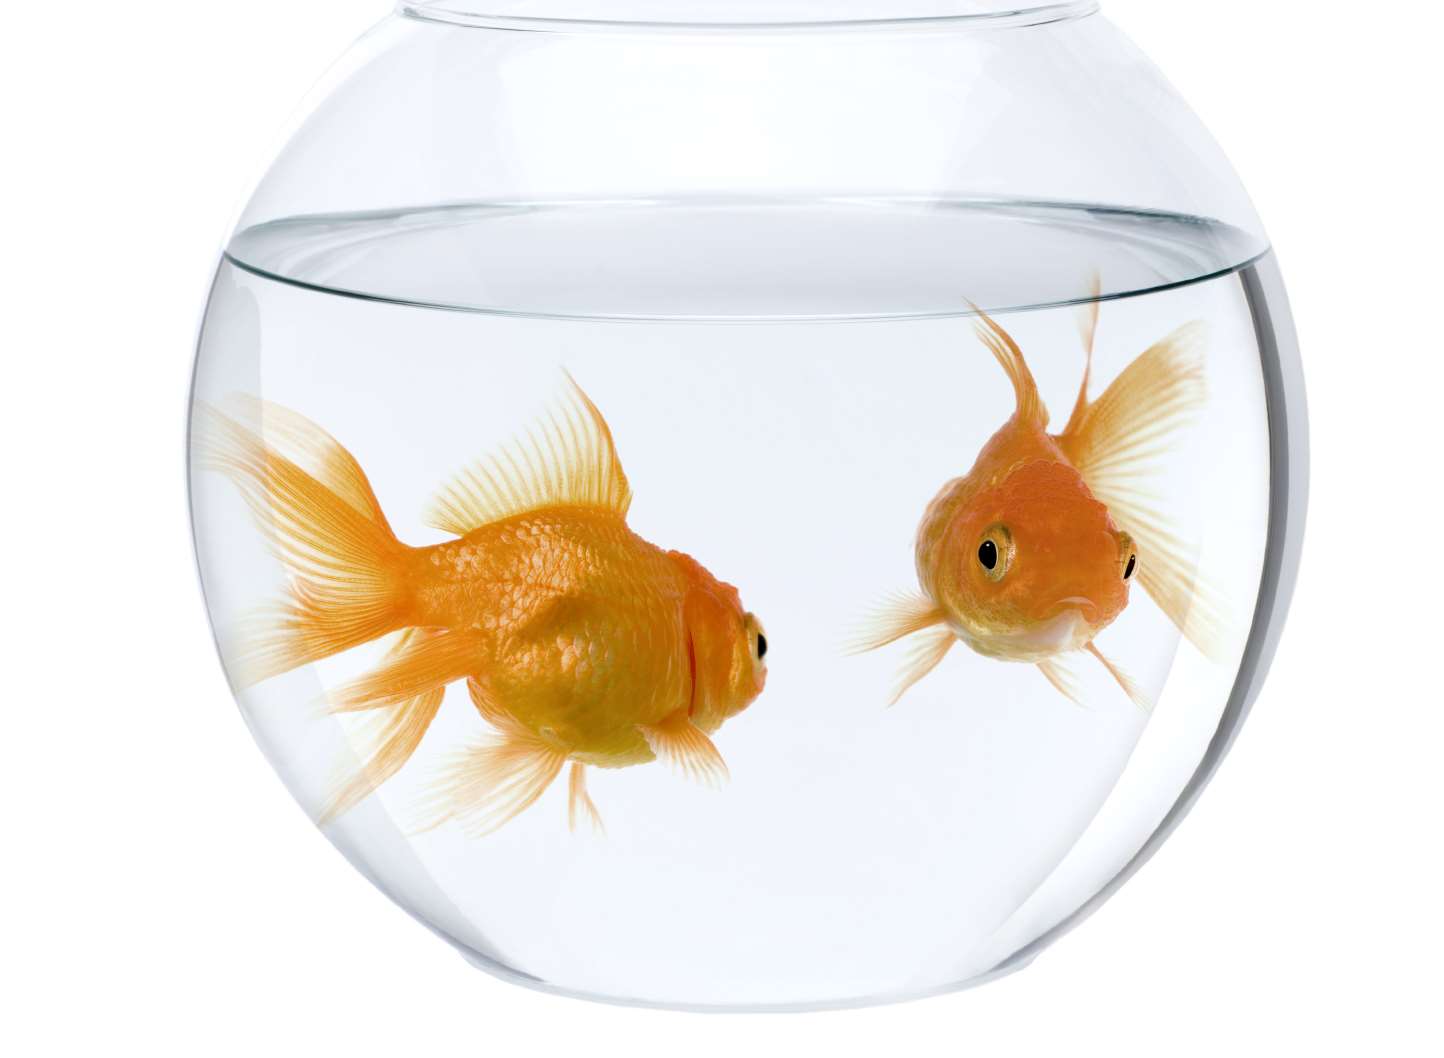 Two goldfish were rescued. Library image.